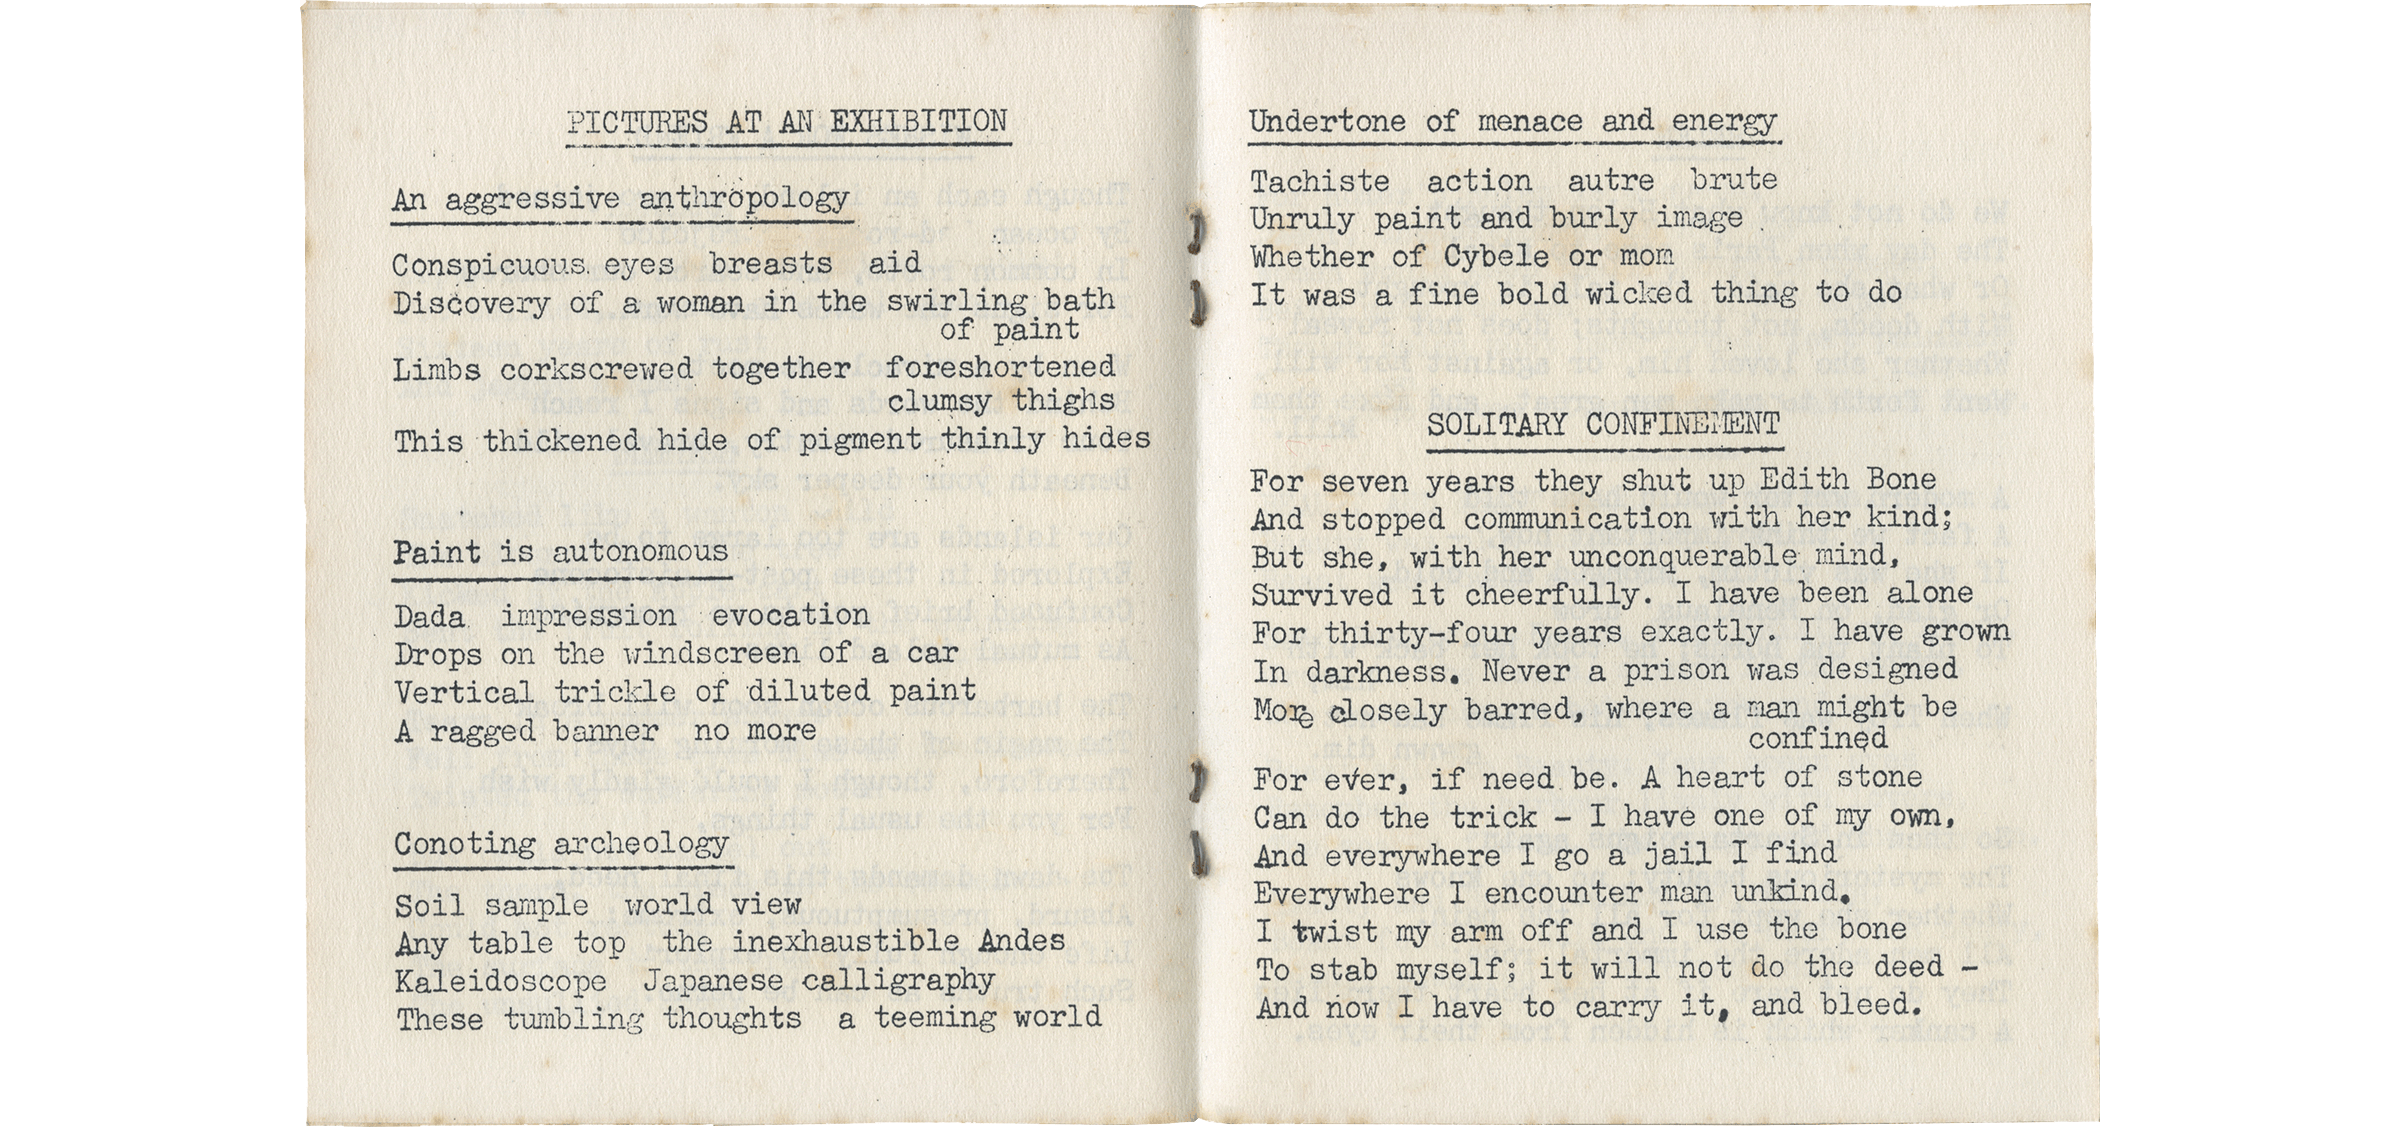 Spread from Poems by Twelve Members of Writers’ Forum: Mary Berry (Leivien), Lois Hieger, Wendy Stockham, Ninette Quinn, Norman Wallace, Bob Cobbing, John Rowan, Nancy Taylor, Gerda Mayer, Maurice Langham, Jean Salisbury and Brian Gould (August 1959)